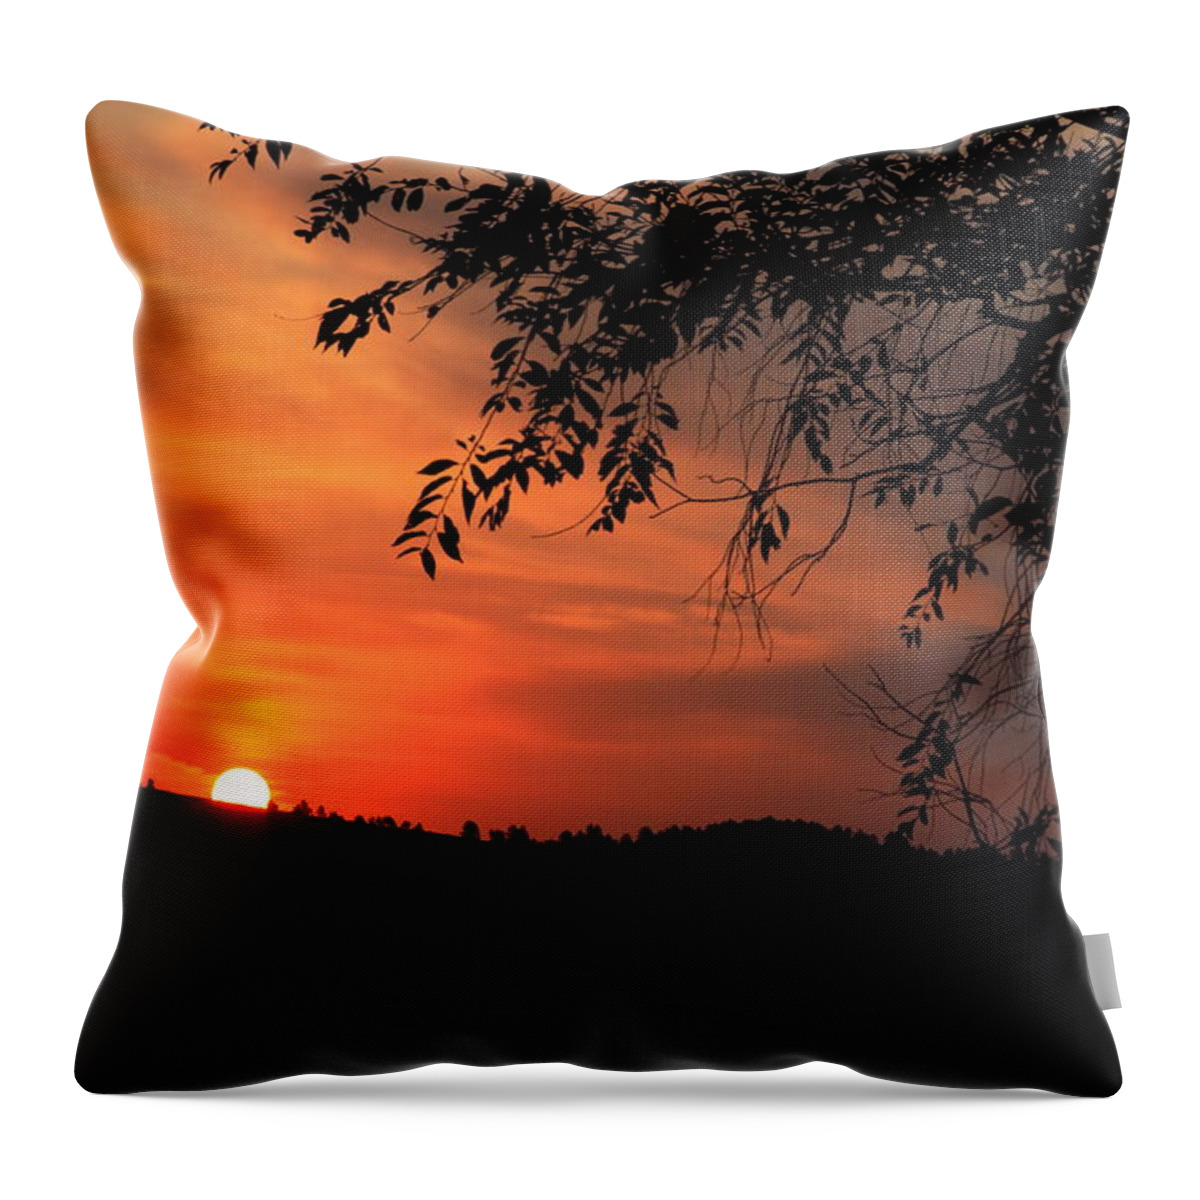 Sunrise Throw Pillow featuring the photograph Early Morning by Donald J Gray